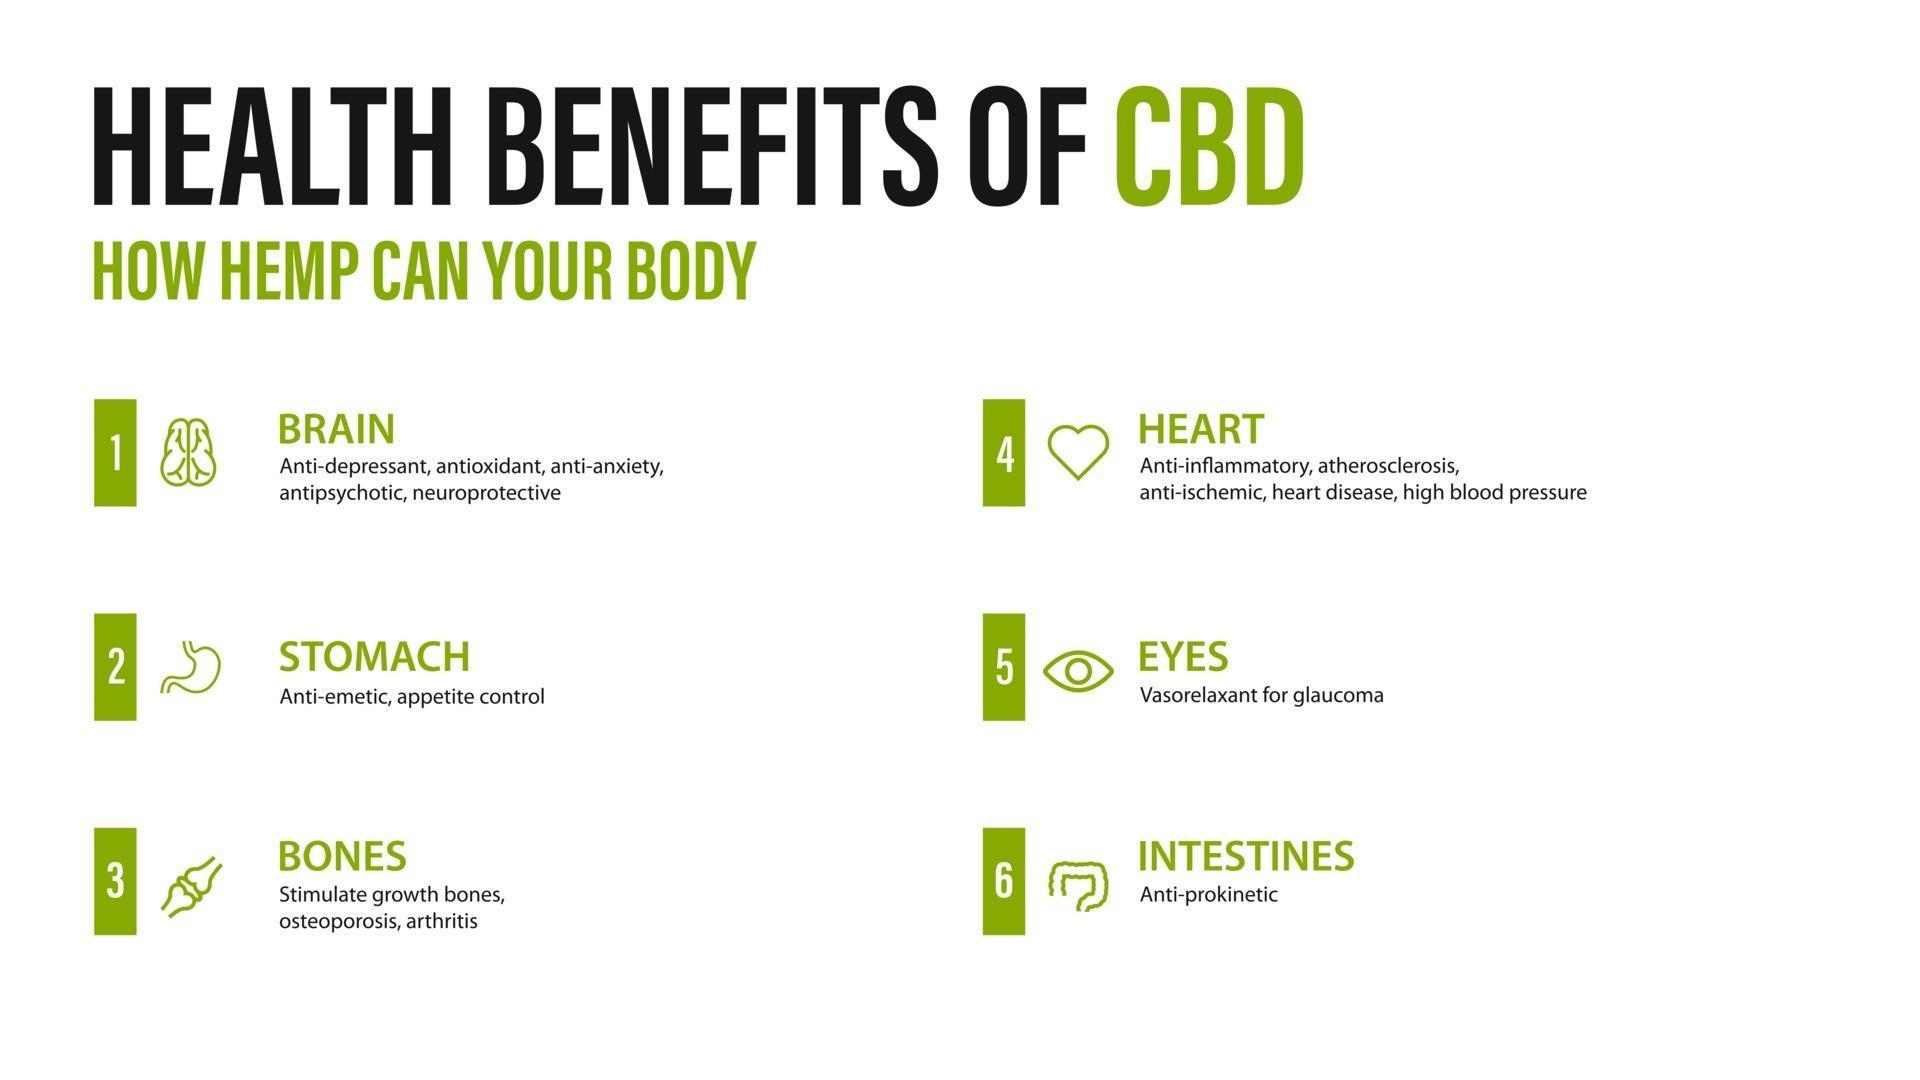 Benefits Of Cbd For Your Body White Poster With Infographic Health